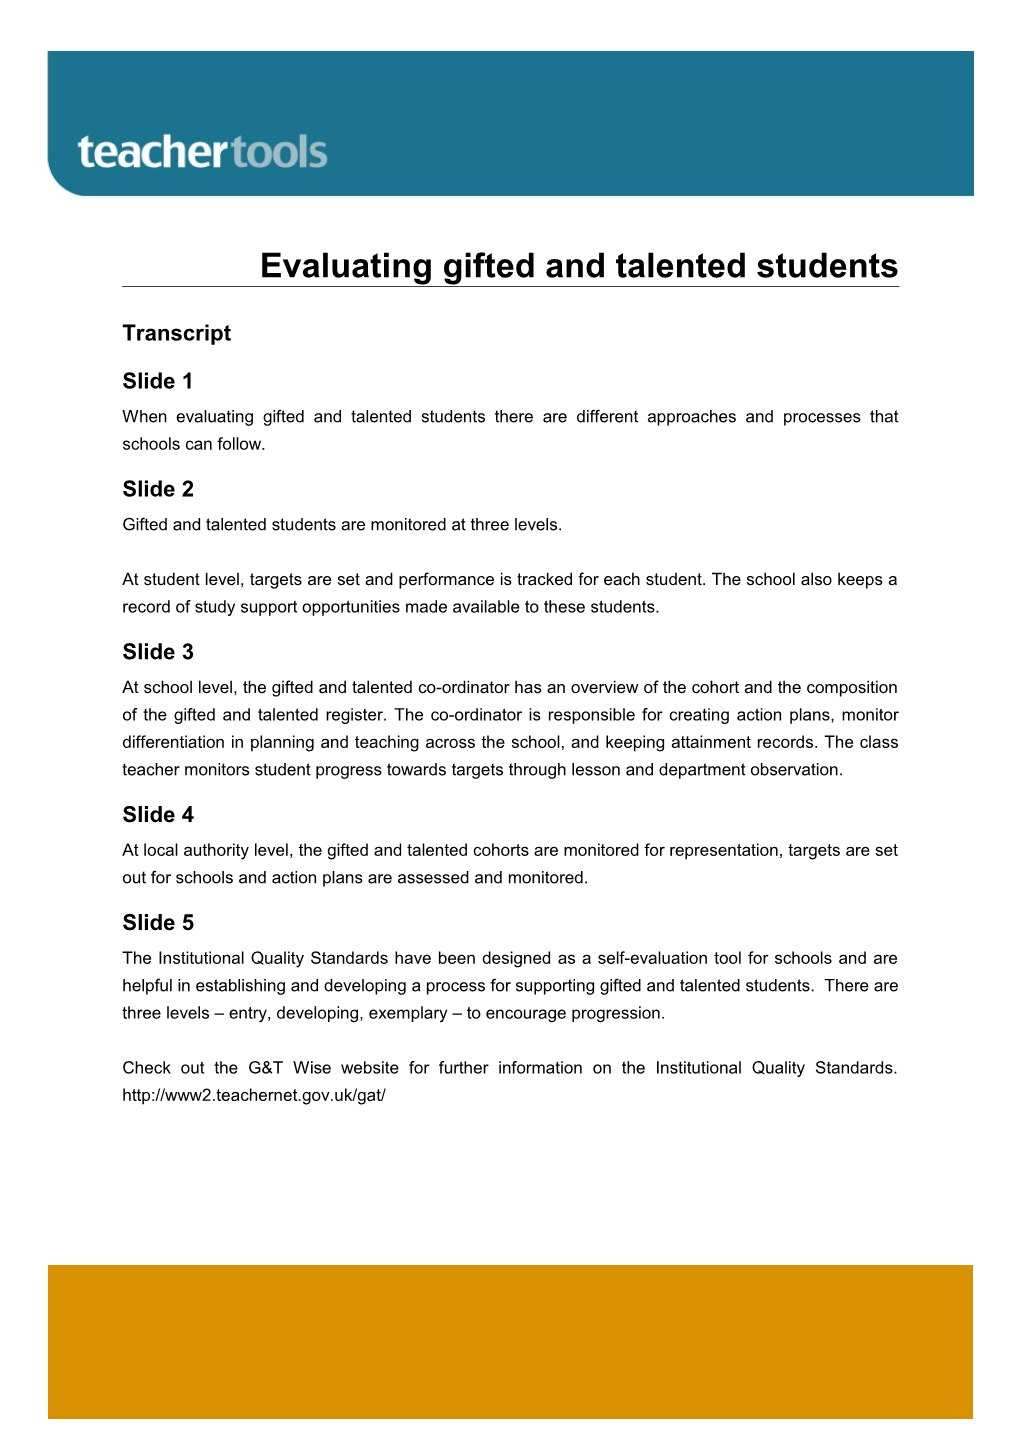 Evaluating Gifted and Talented Students